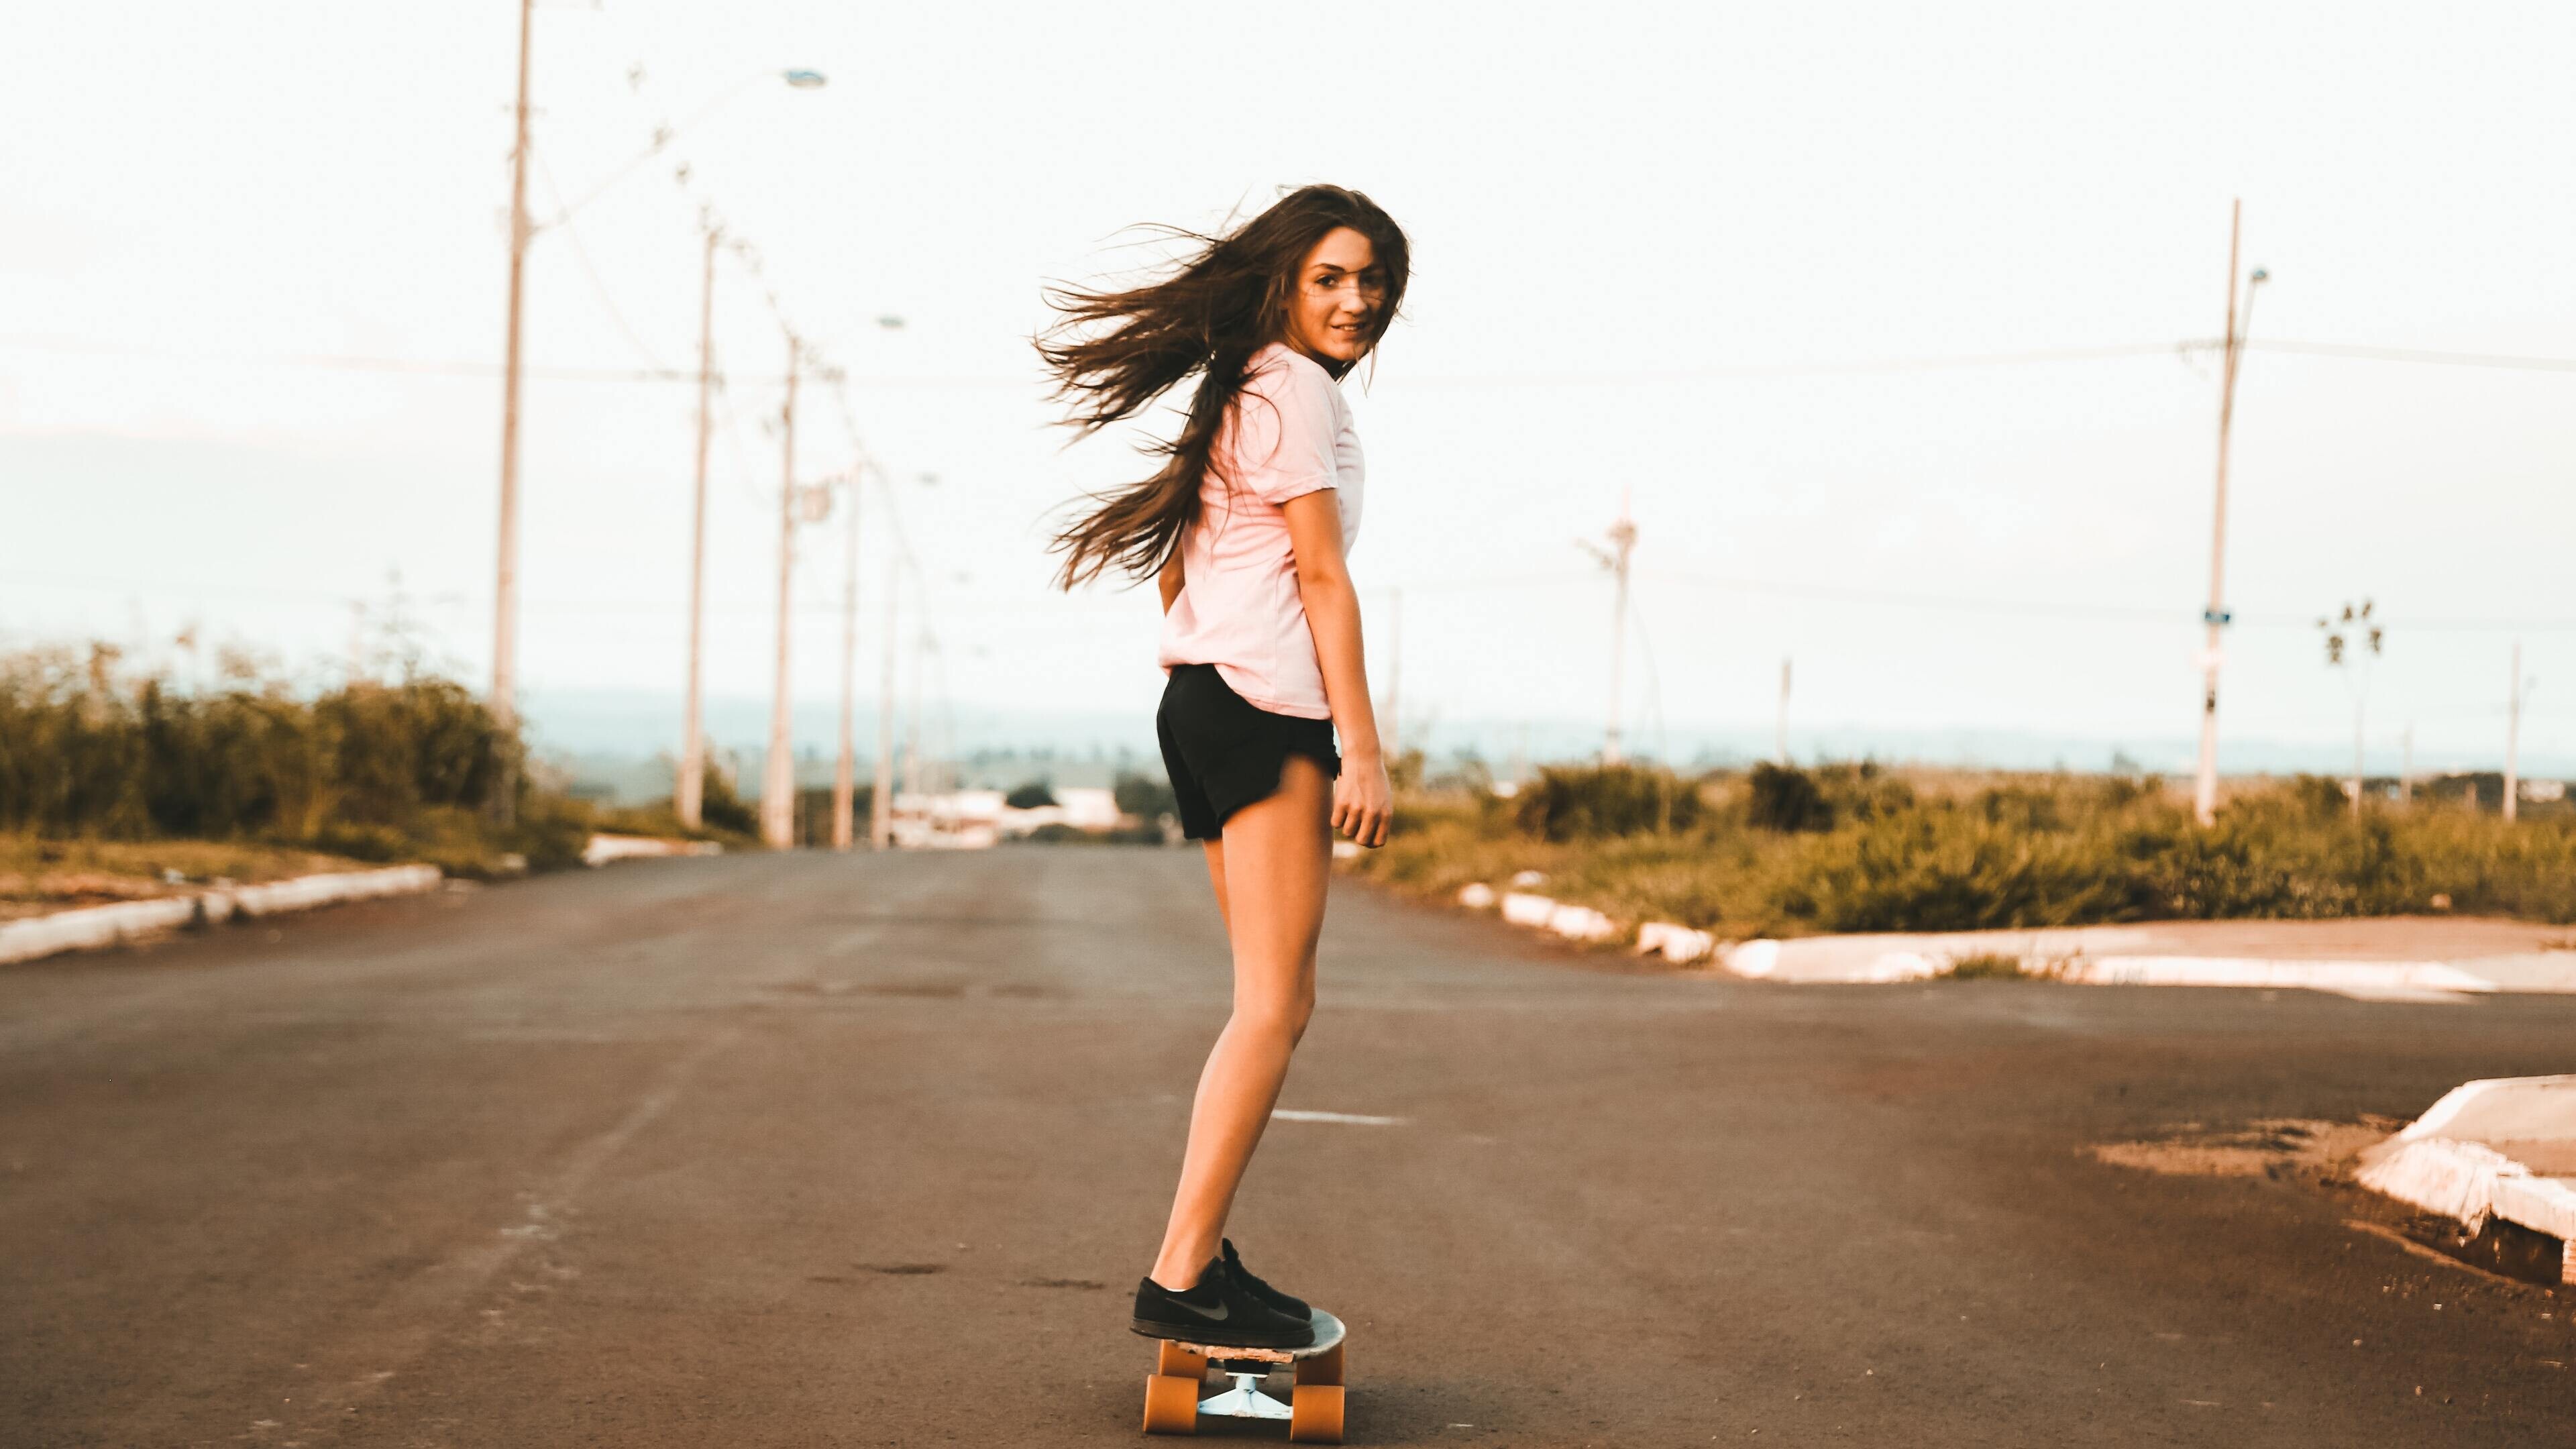 Girl Skateboarding: Longboard, Typically designed and optimized for cruising, Covering distances at moderate speeds. 3840x2160 4K Wallpaper.